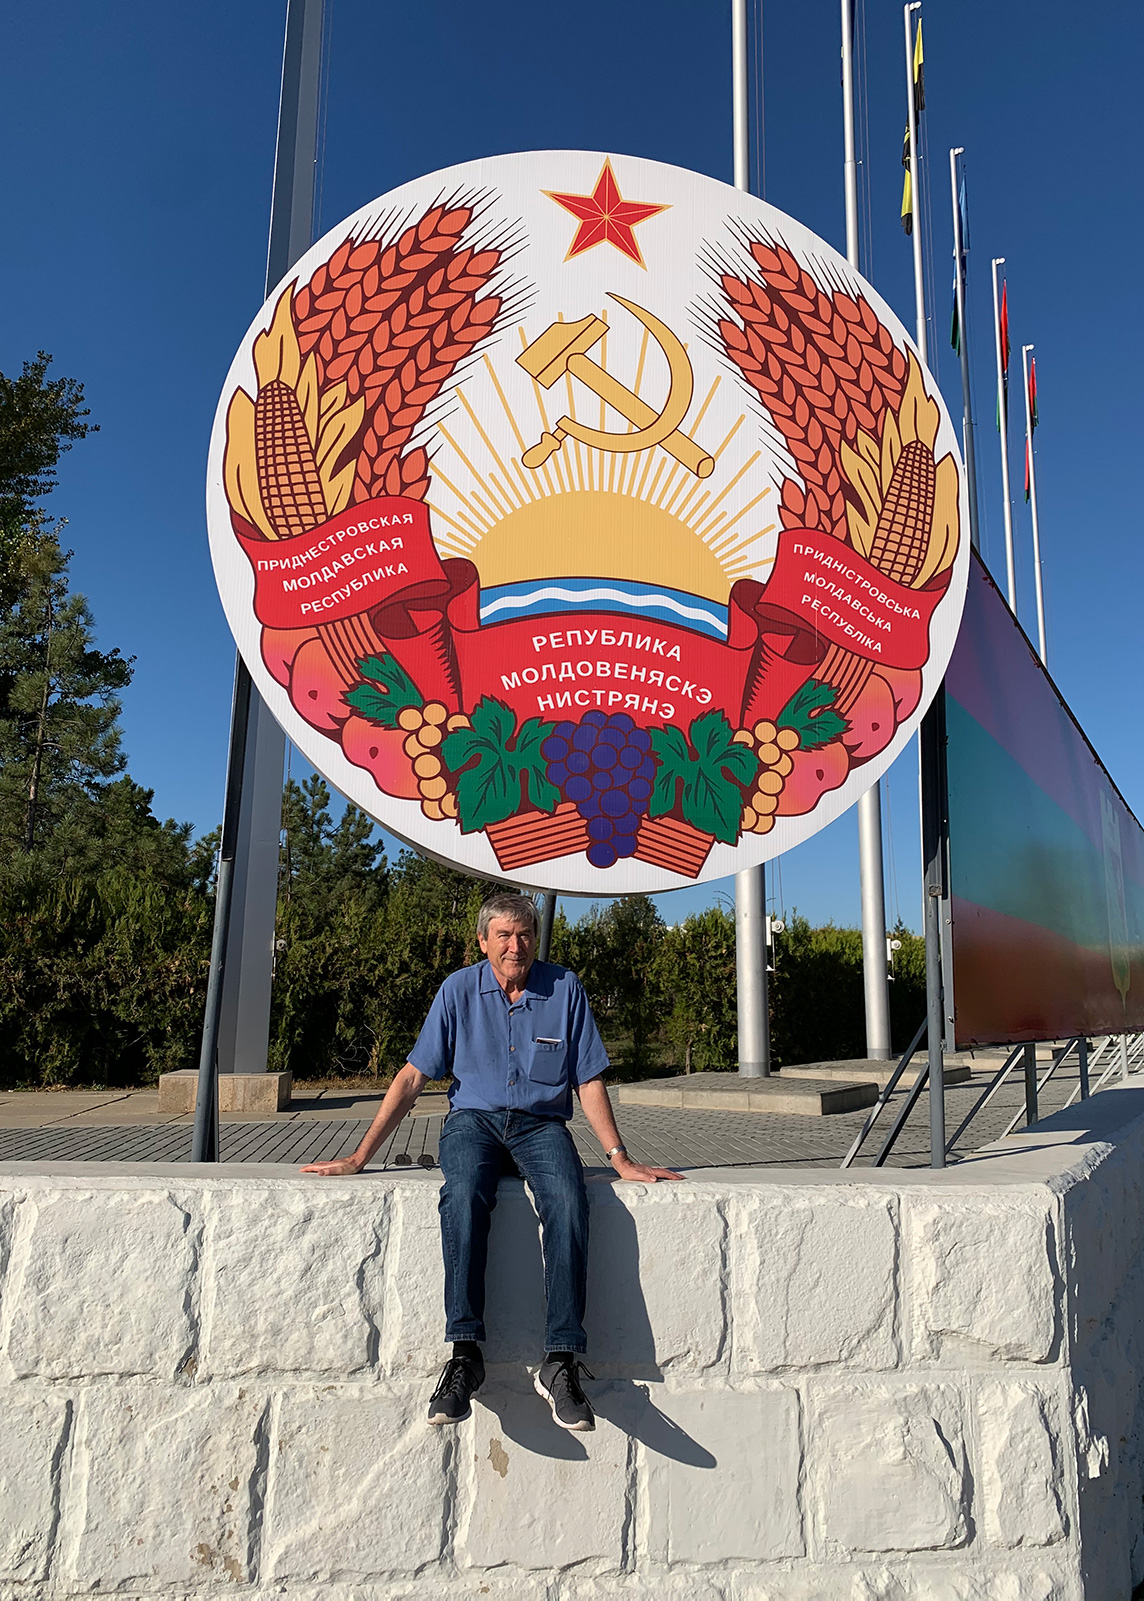 Paul Davies sits in front of a colorful sign for a the post-soviet breakaway state of Transnistria